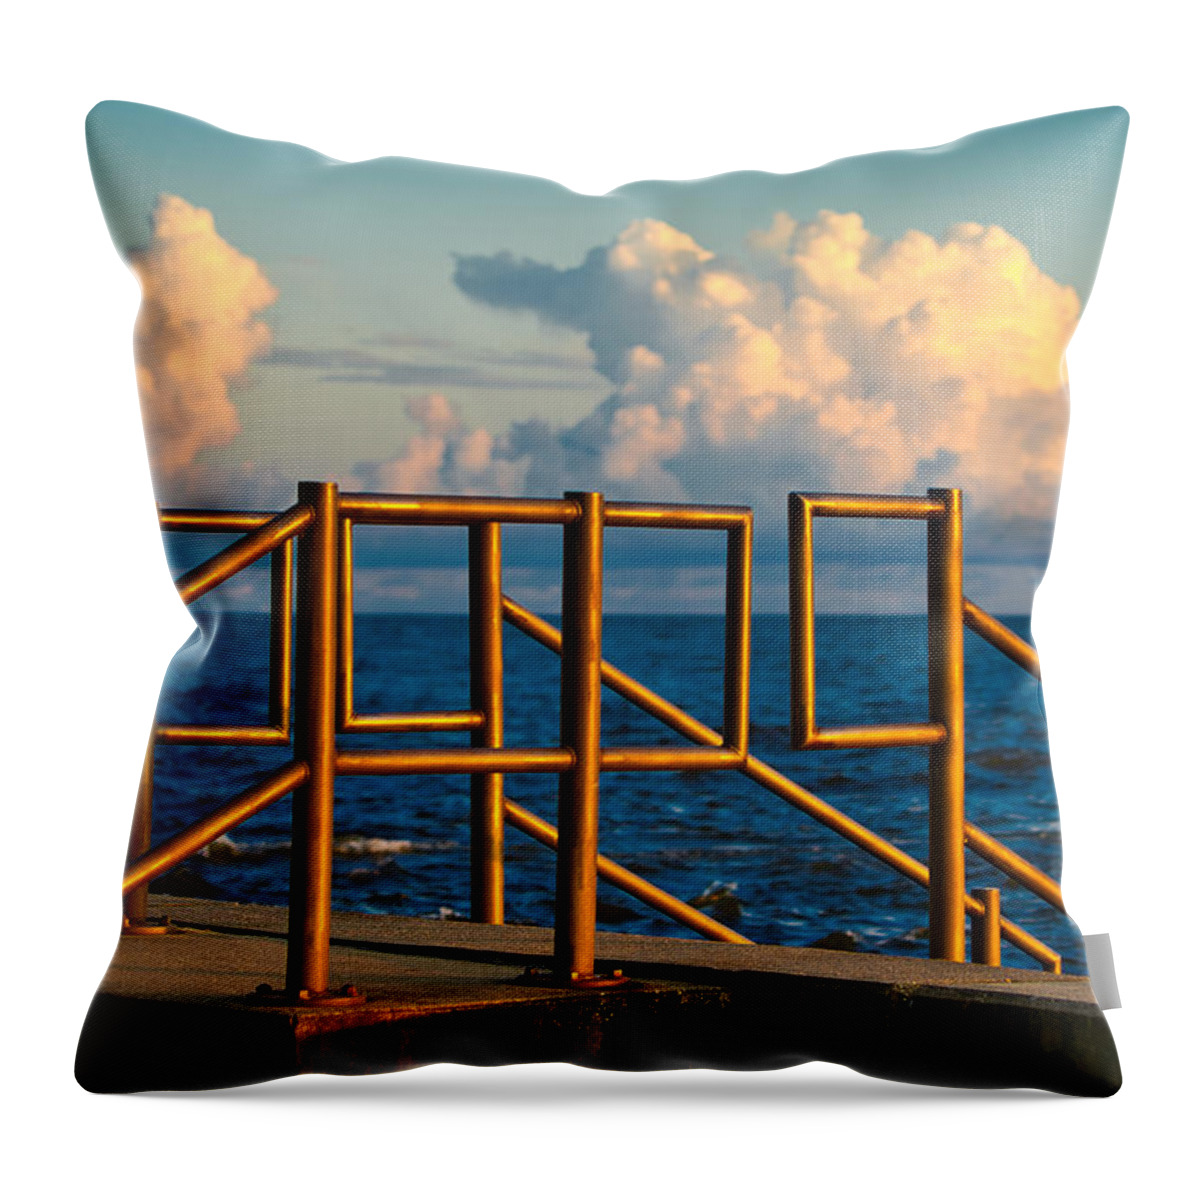 Railing Throw Pillow featuring the photograph Golden Railings by Tom Gresham